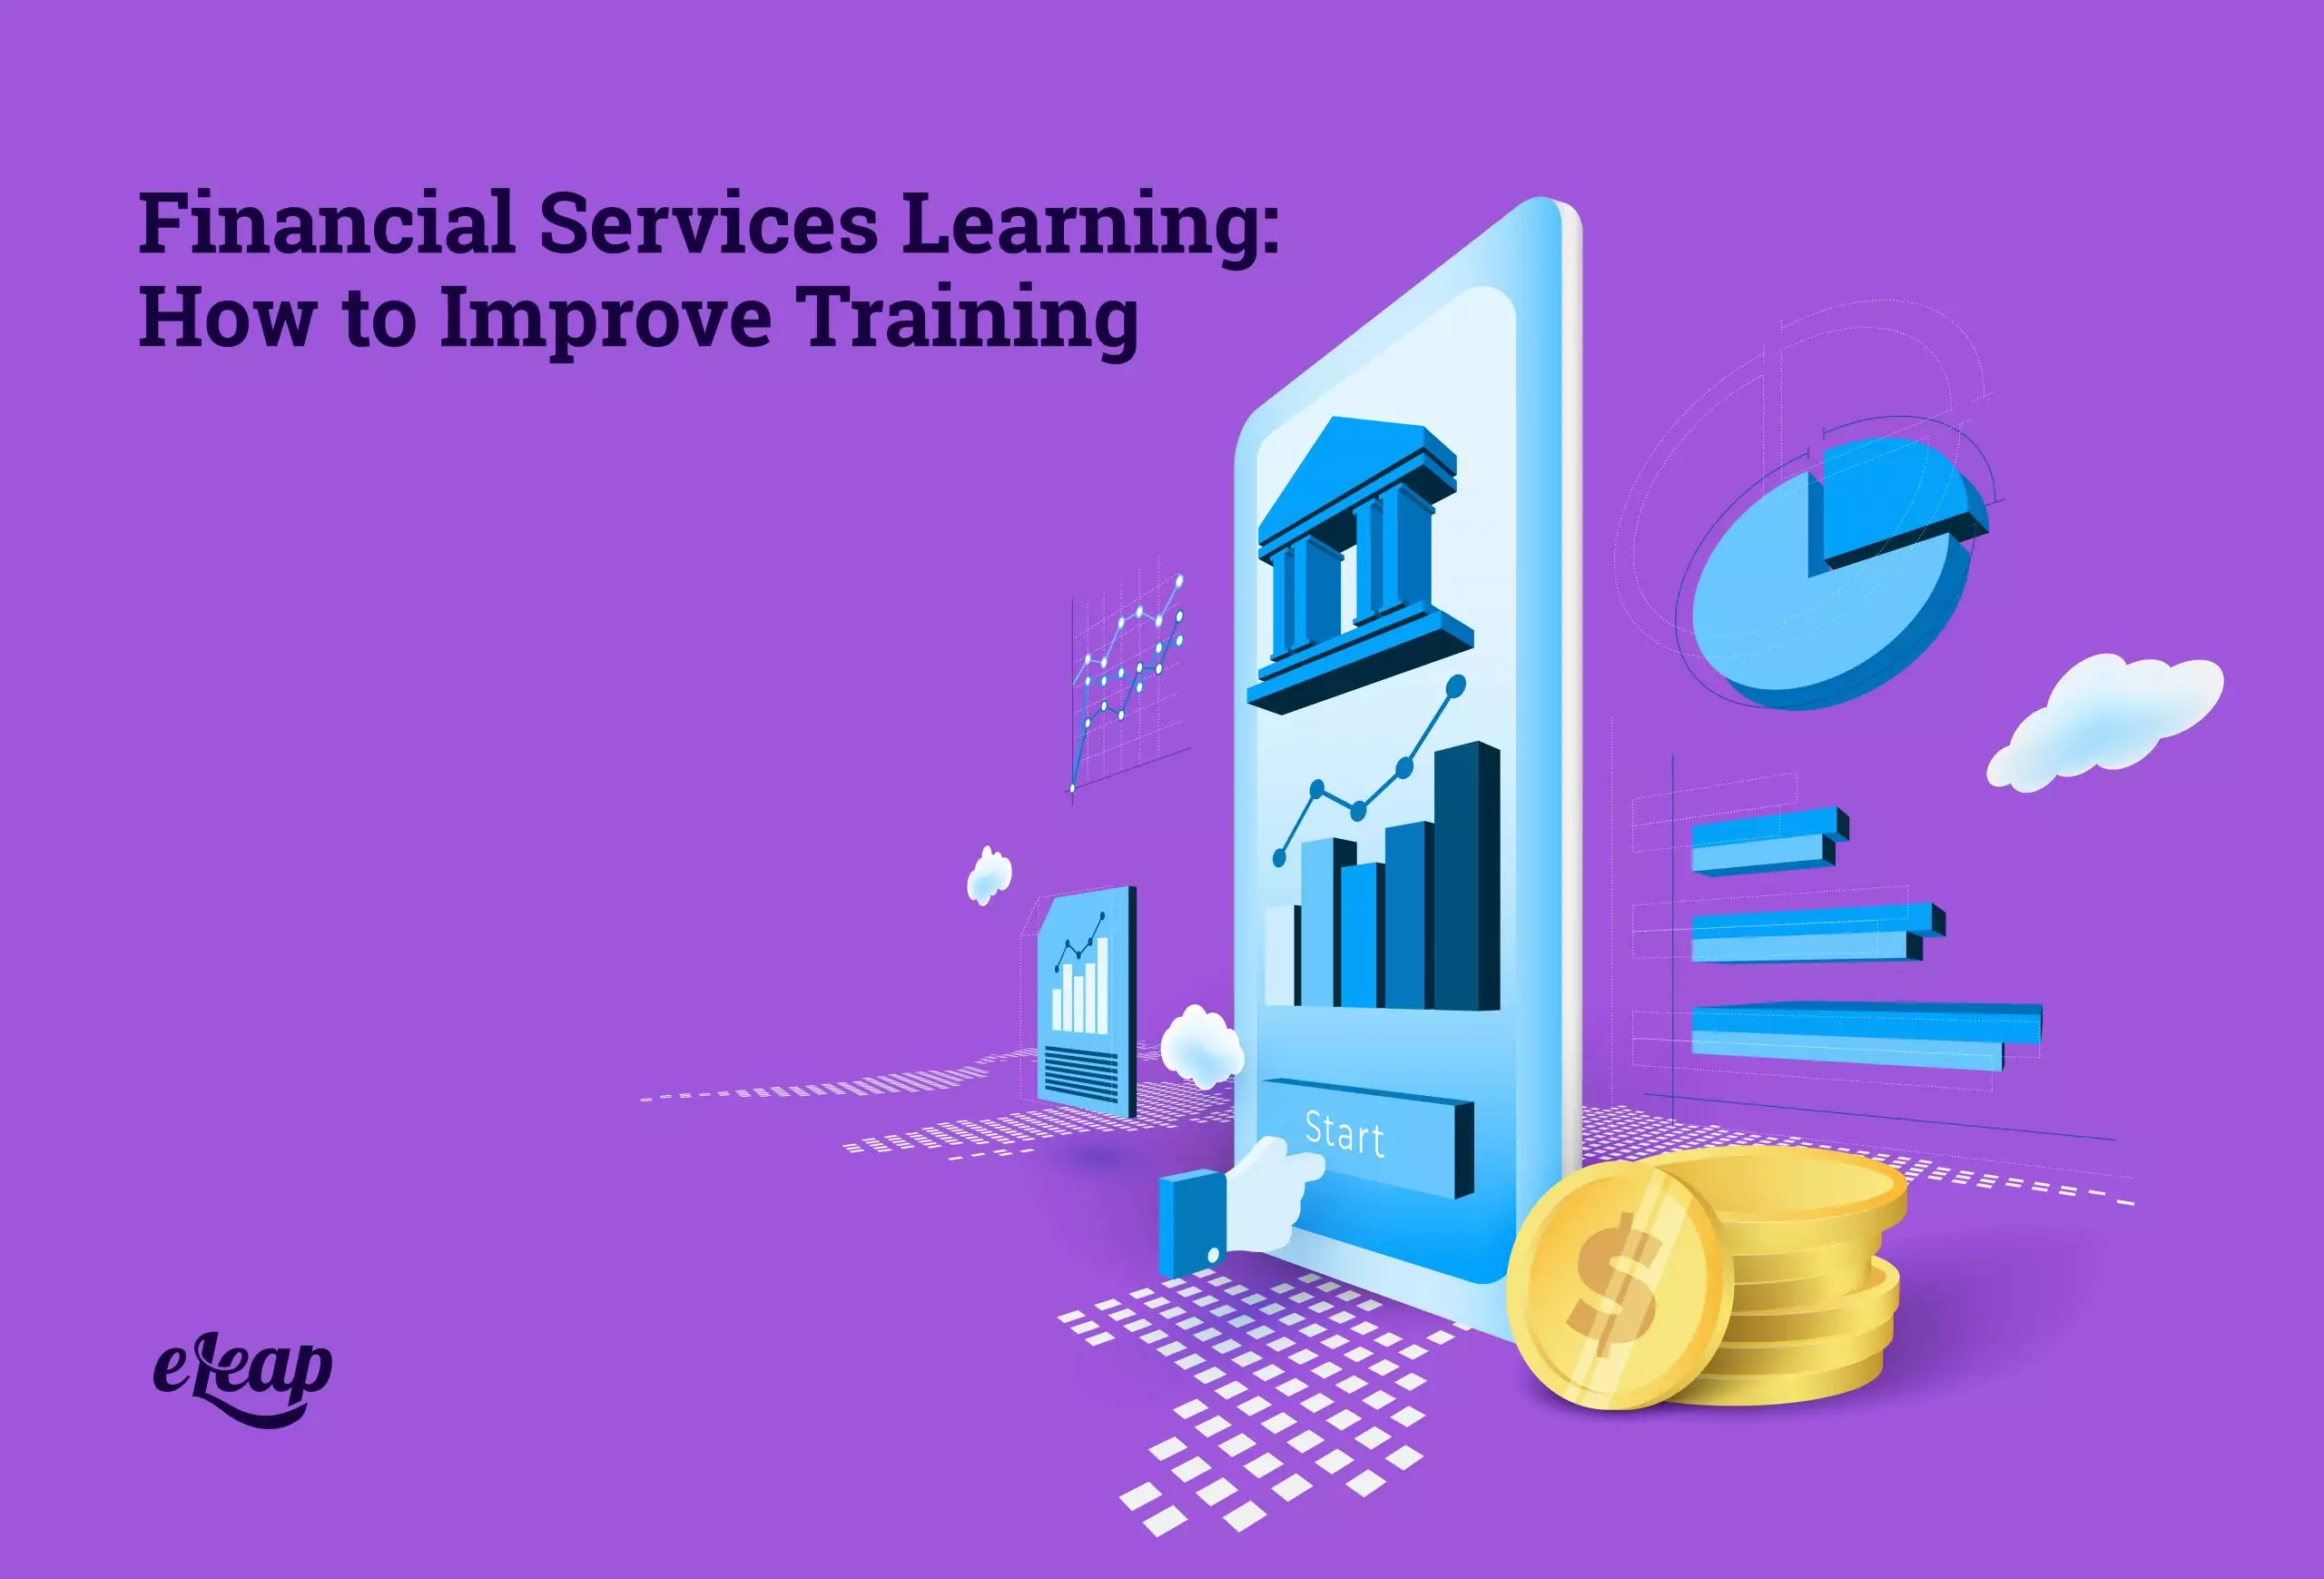 Financial Services Learning: How to Improve Training